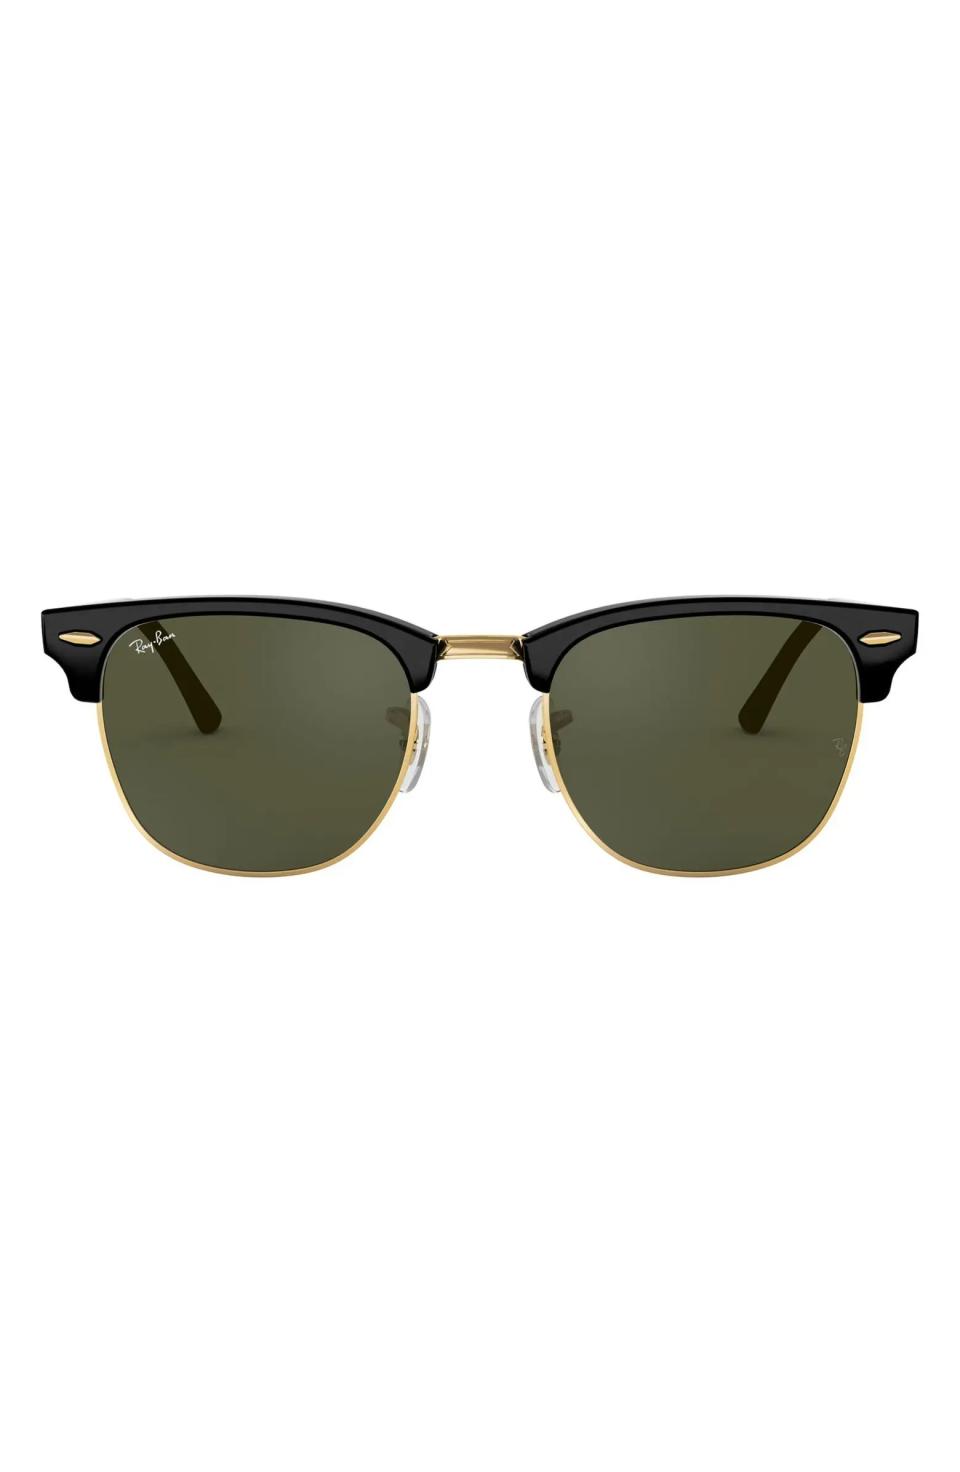 Ray-Ban Clubmaster 51mm Sunglasses